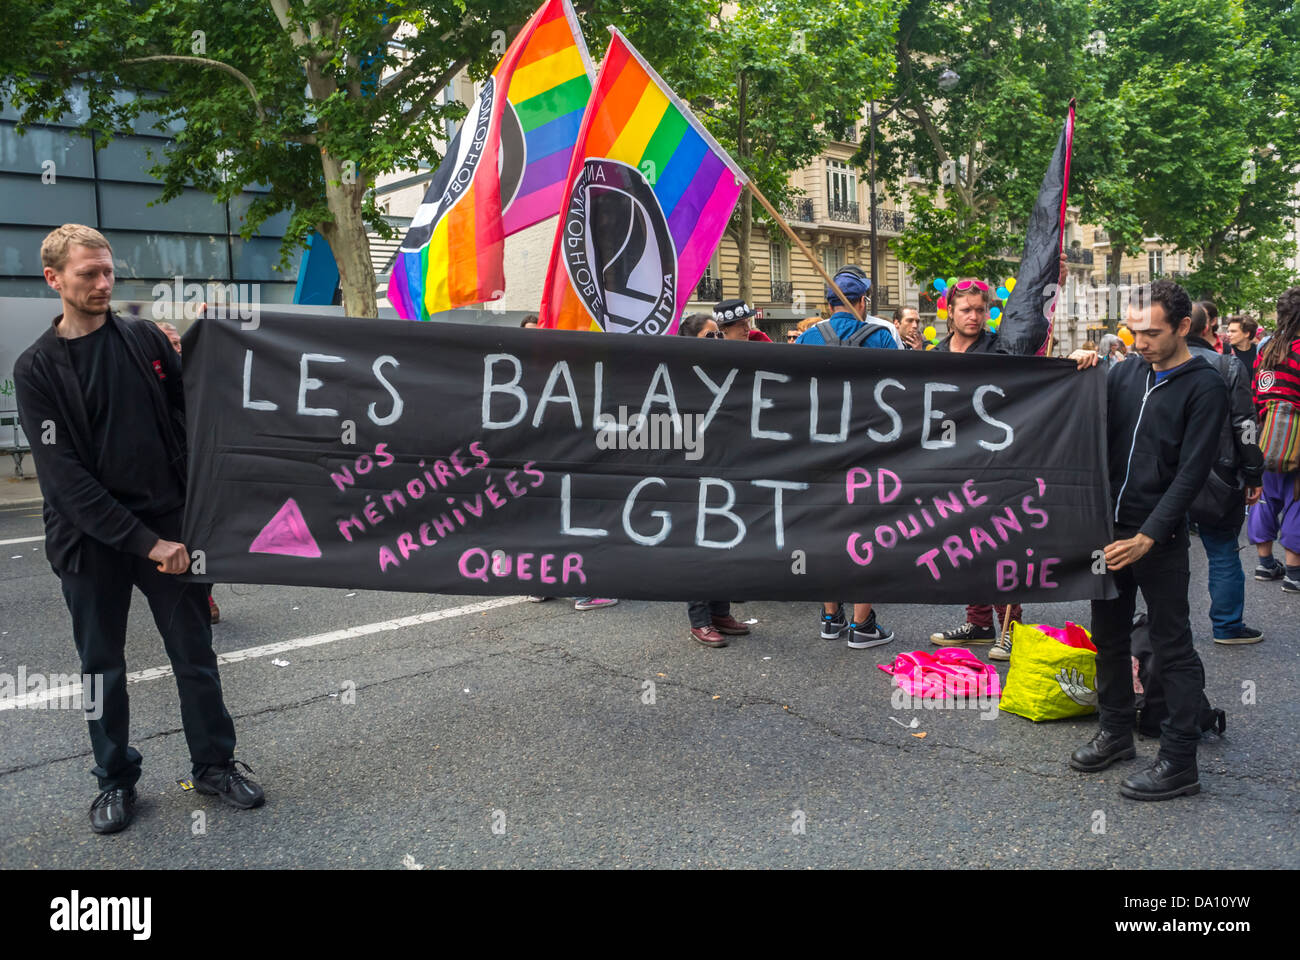 Paris, France, LGBT Groups Marching in Annual Gay Pride Parade, 'Les Balayeuses Archivists' Holding Banner Stock Photo